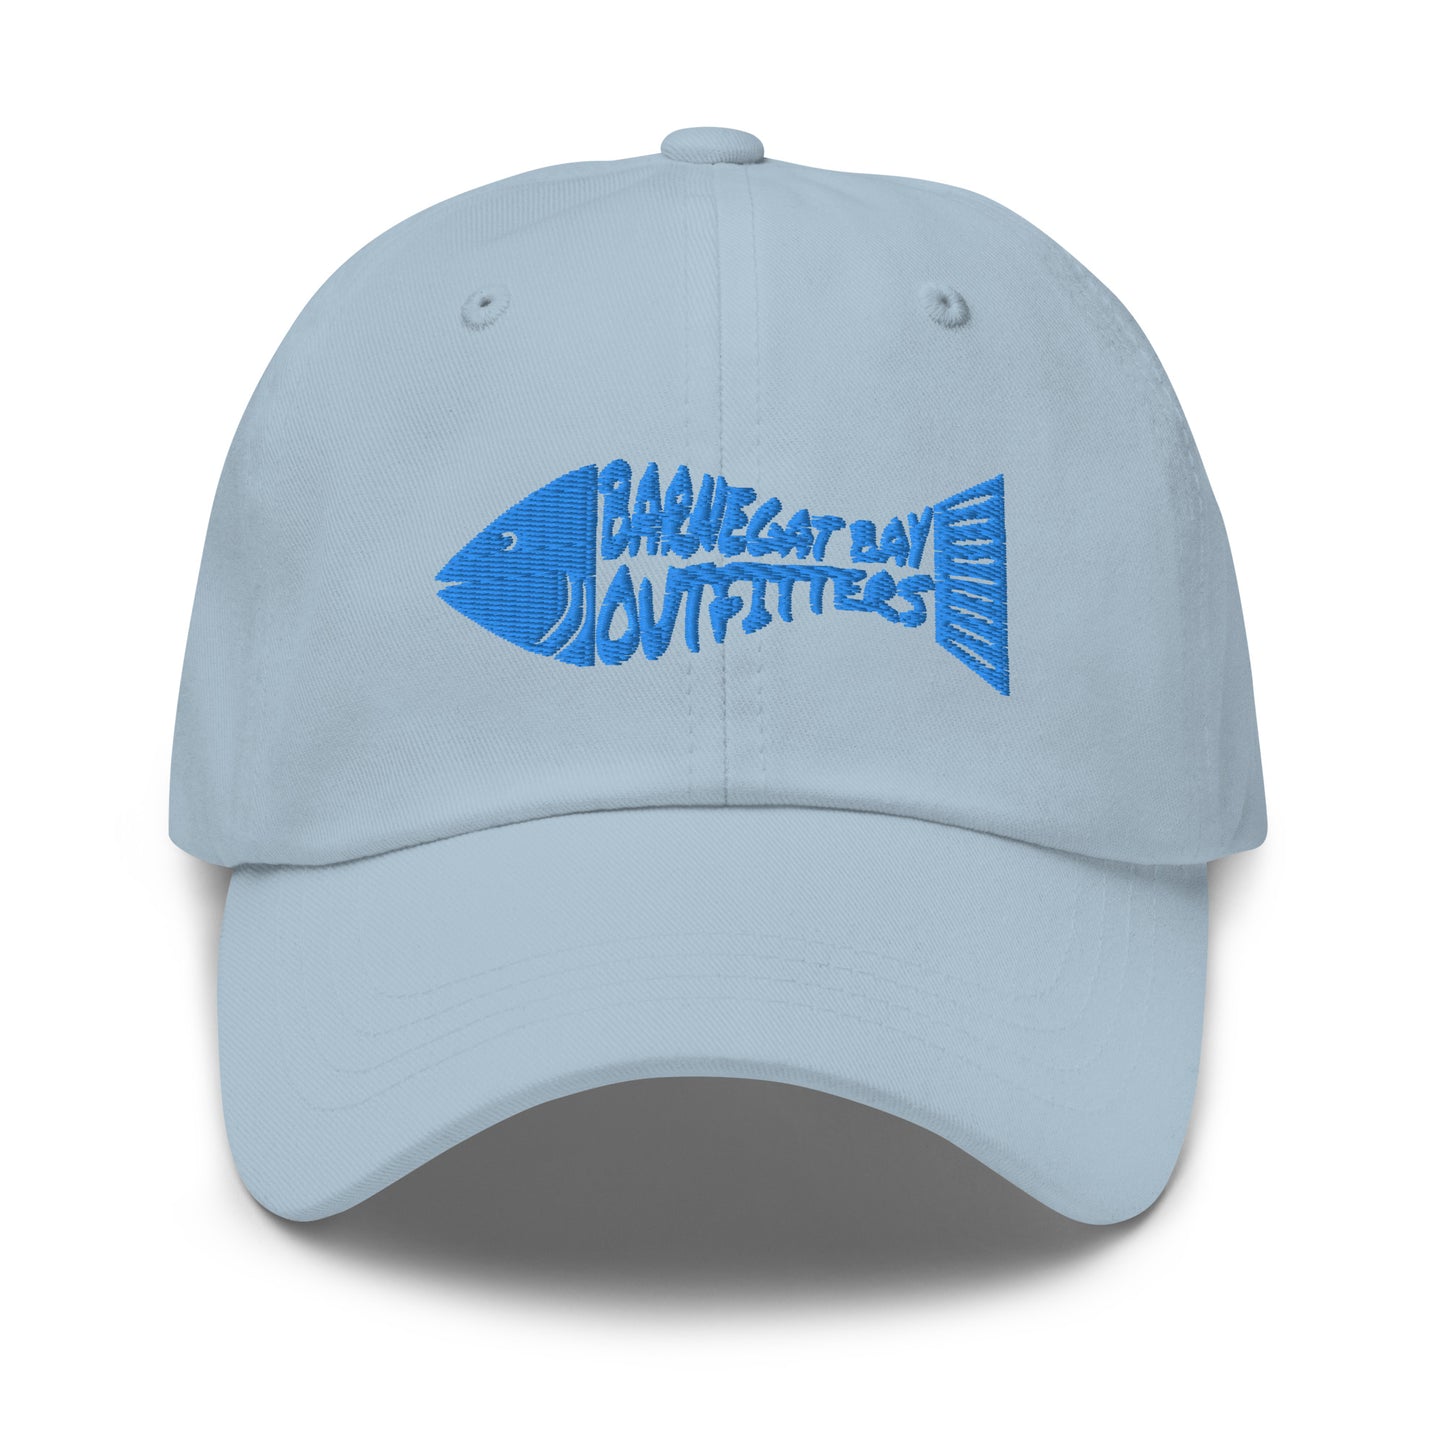 Barnegat Bay Outfitters Fish Logo Embroidered Hat – BarnegatBayOutfitters